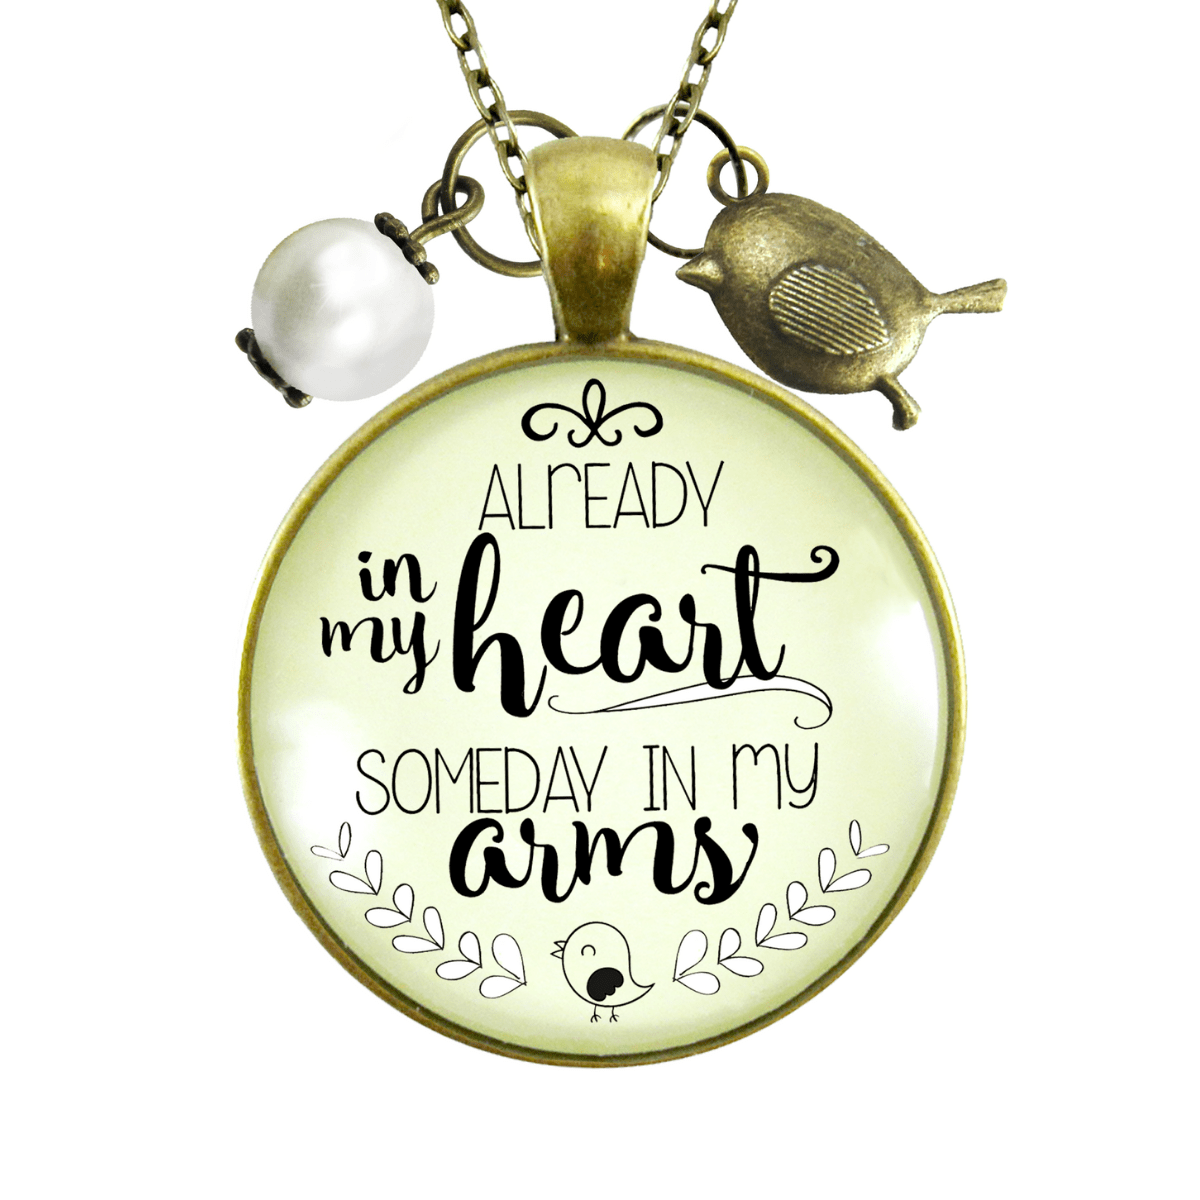 Gutsy Goodness Already in My Heart Mothers Necklace Expecting Baby Adoption Jewelry - Gutsy Goodness Handmade Jewelry;Already In My Heart Mothers Necklace Expecting Baby Adoption Jewelry - Gutsy Goodness Handmade Jewelry Gifts